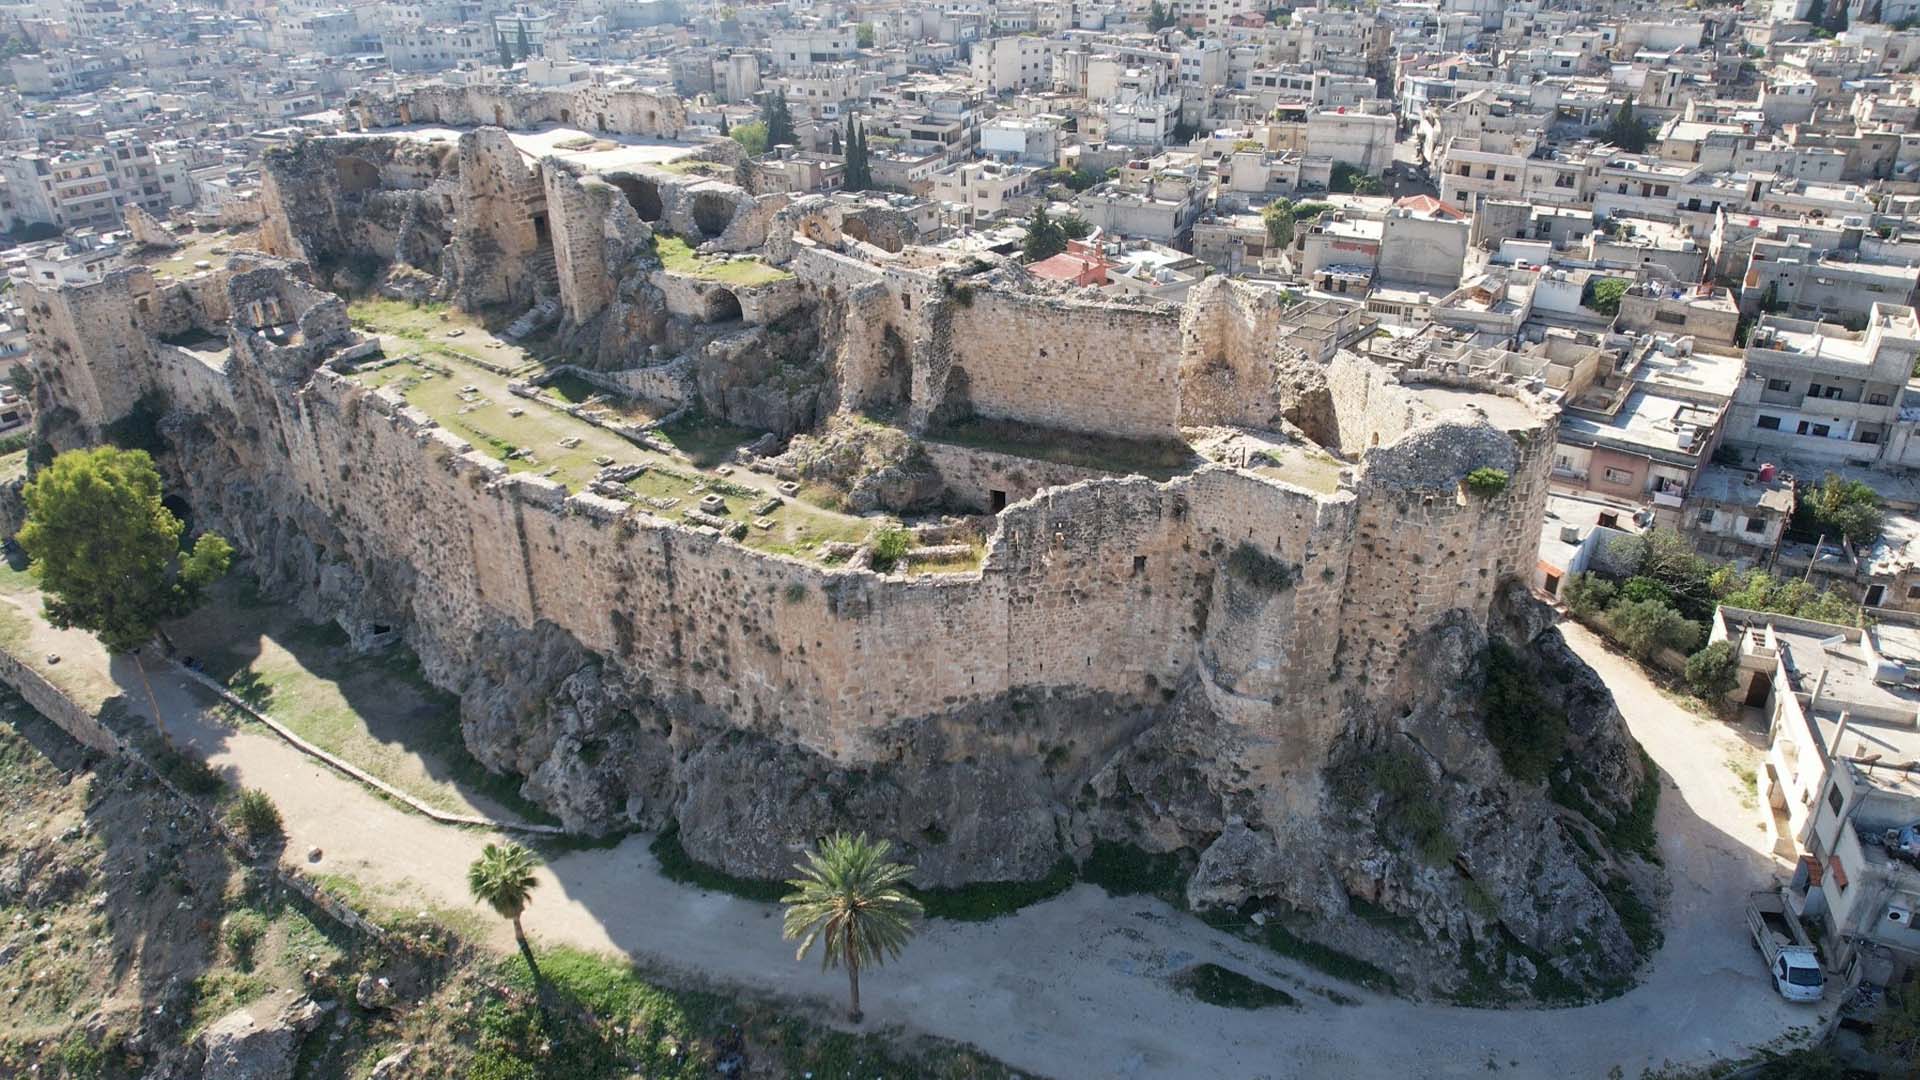 From an aerial perspective, a photograph showcases the magnificent Masyaf Castle, strategically situated atop a hill, while houses are scattered in the background, creating a picturesque scene.